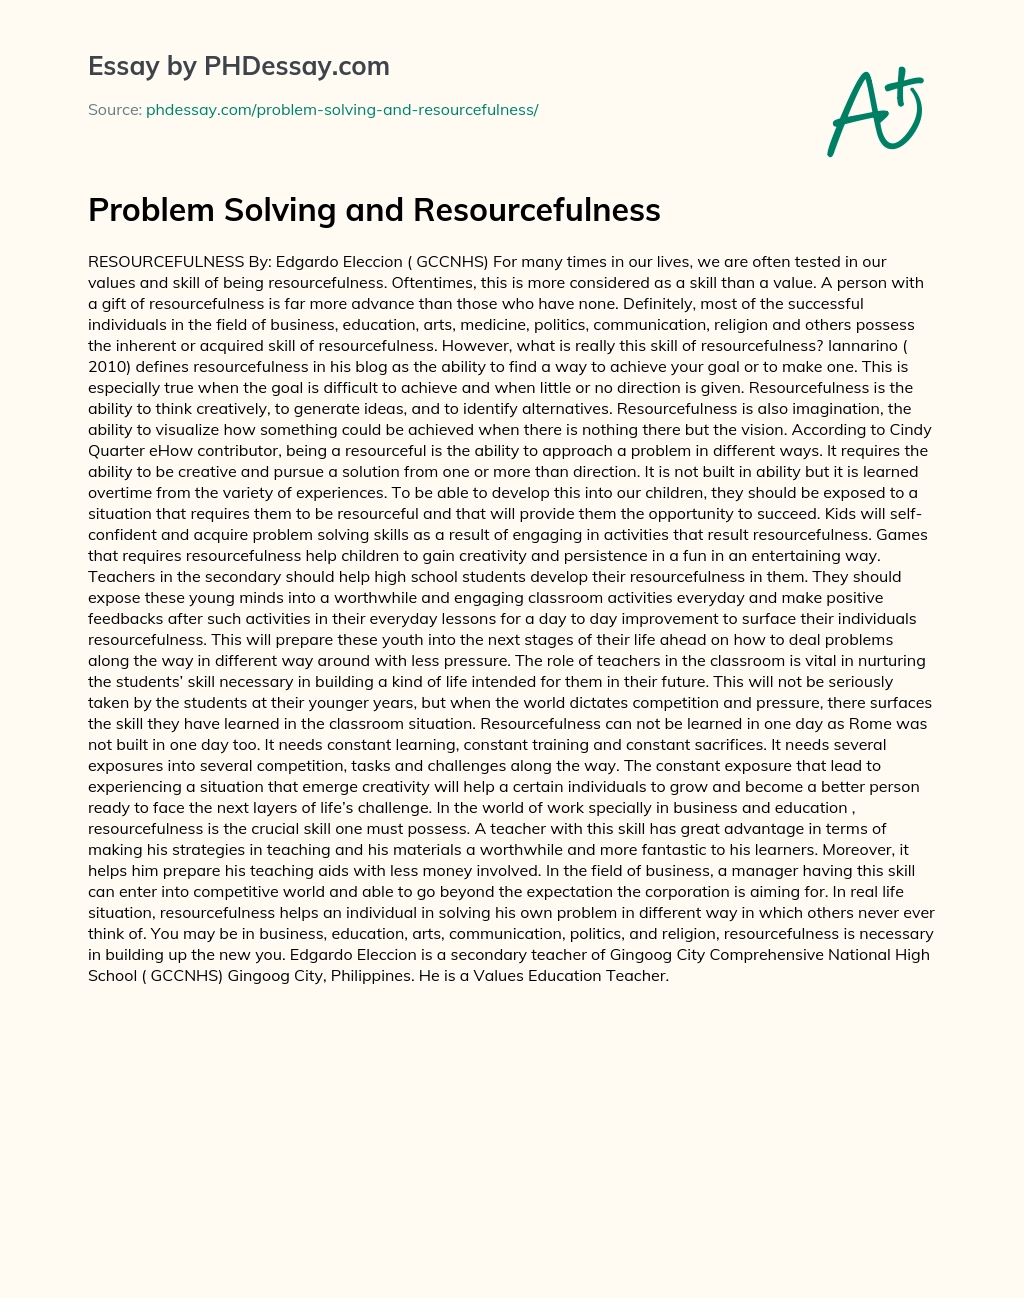 Problem Solving and Resourcefulness essay